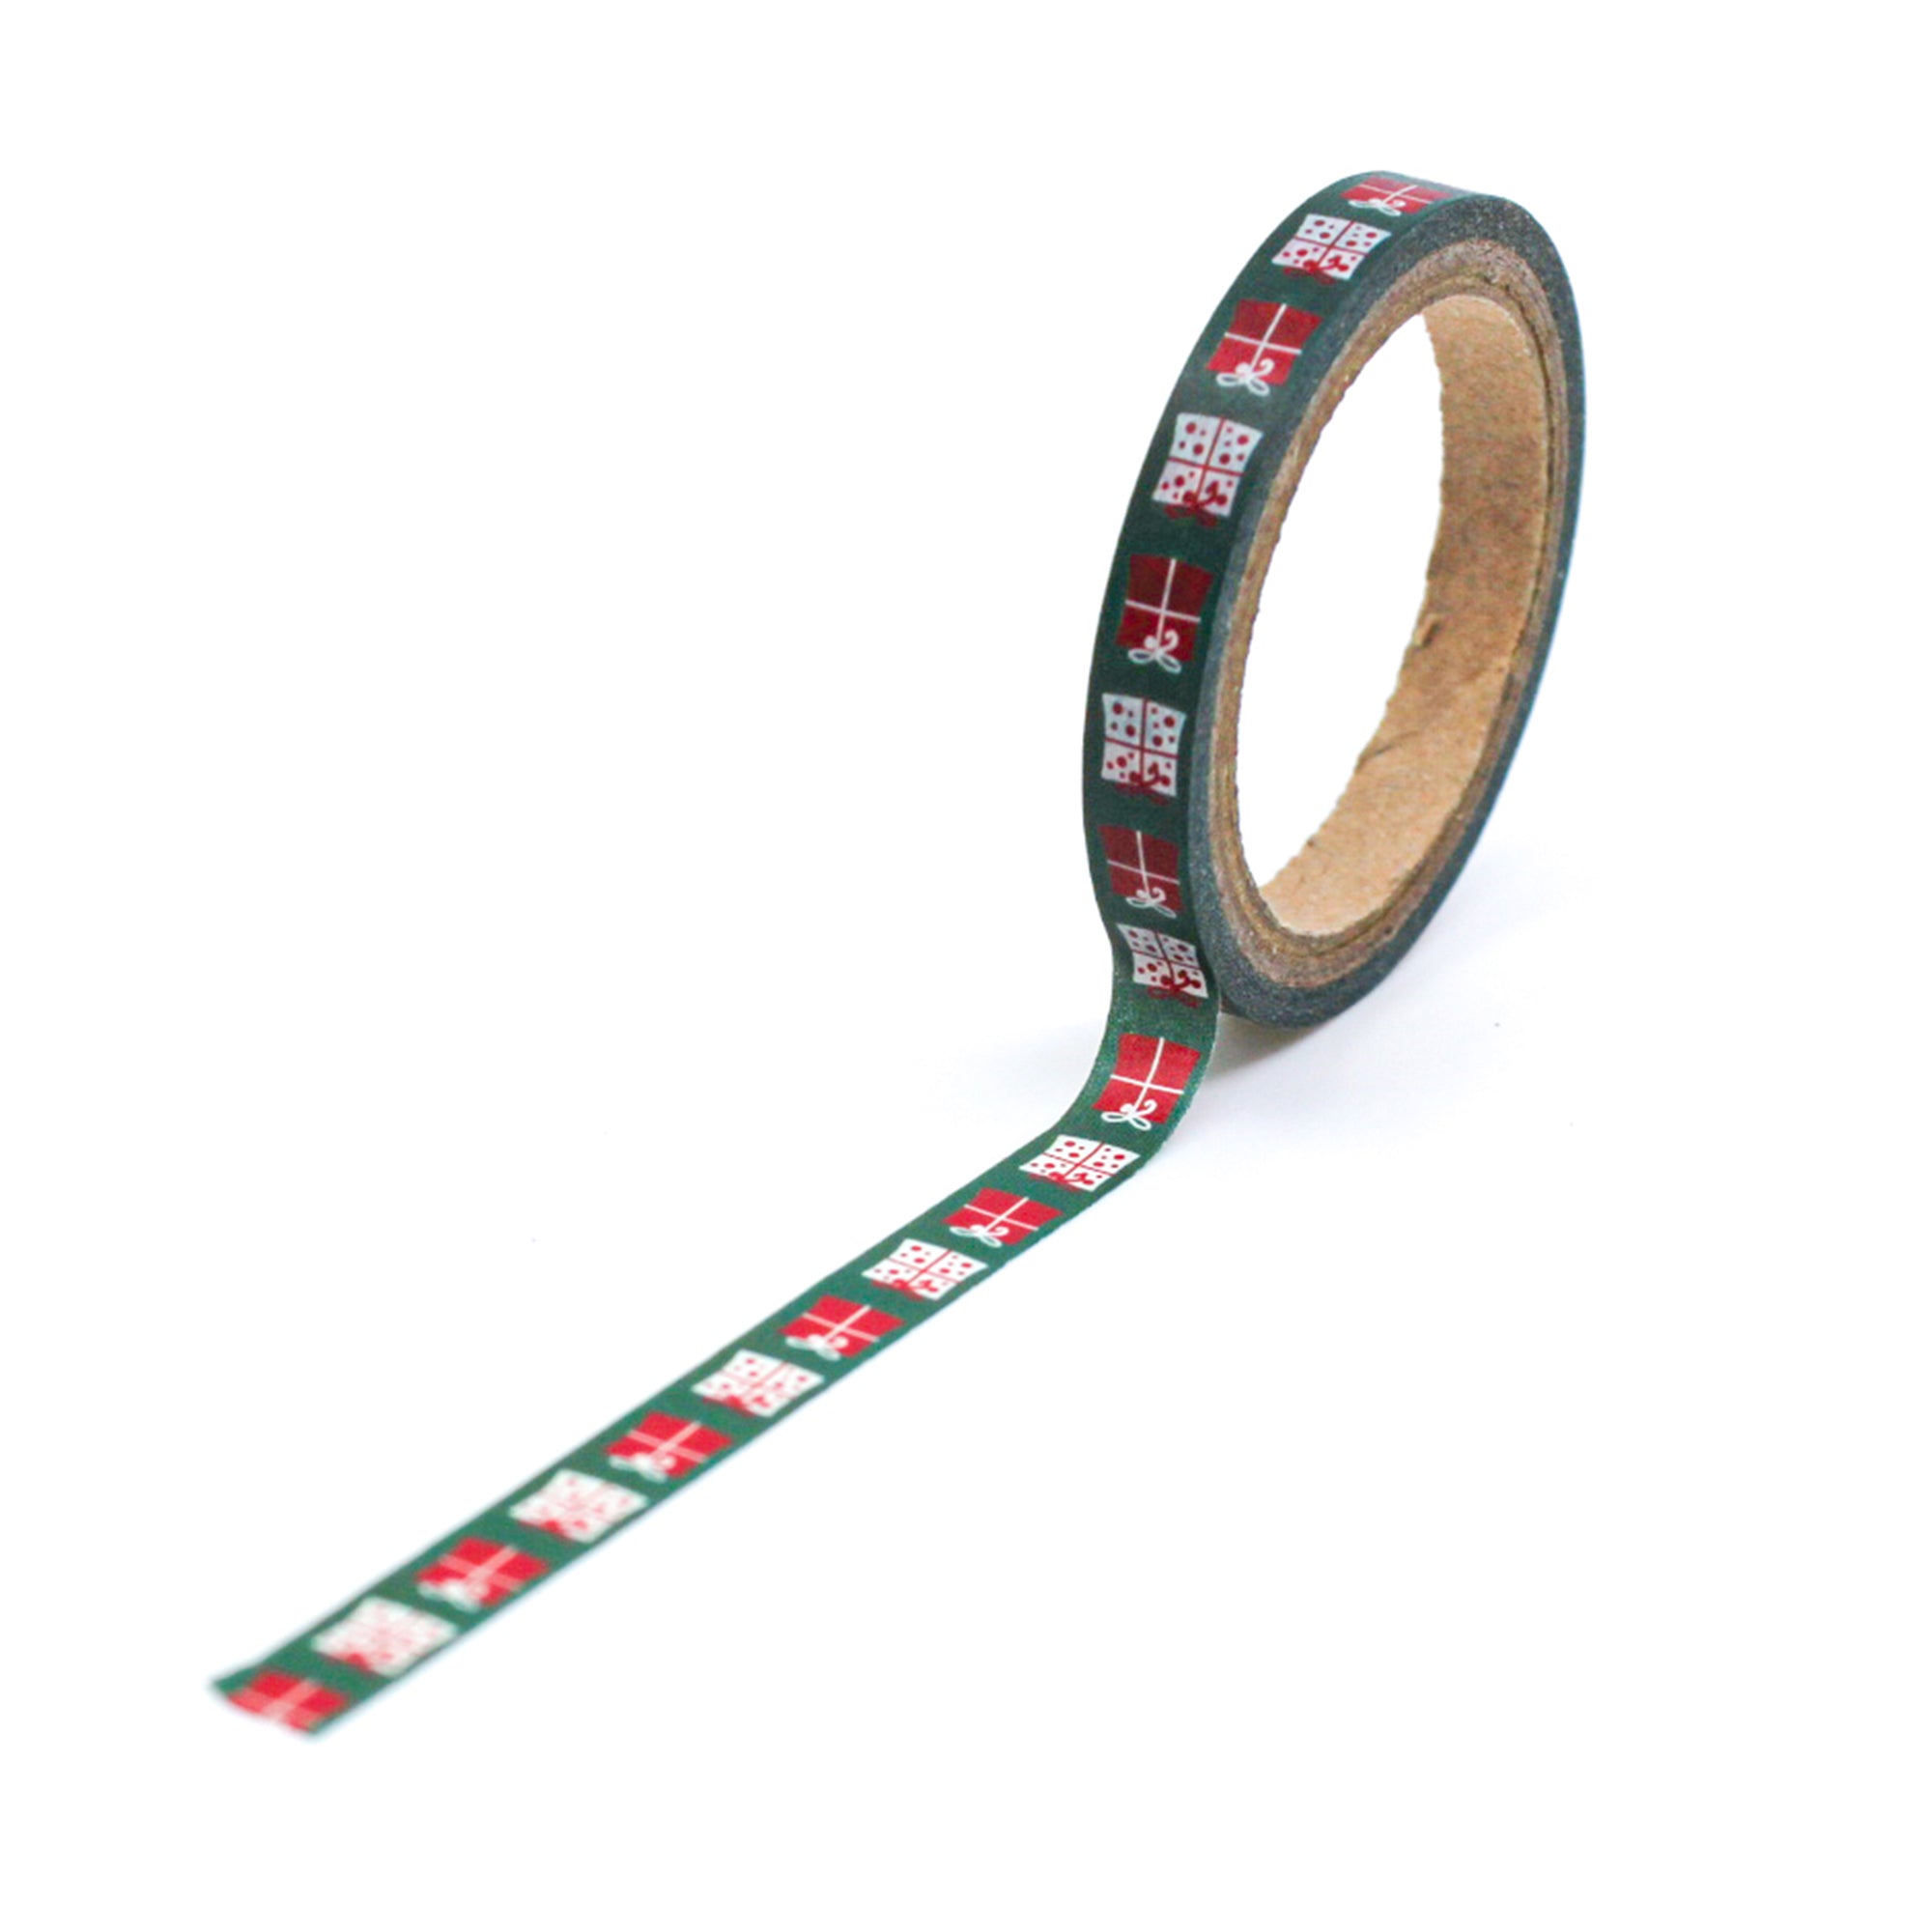 Infuse your creations with the spirit of giving using our washi tape adorned with green Christmas gifts, capturing the joy and excitement of holiday presents. This tape is sold at BBB Supplies Craft Shop.